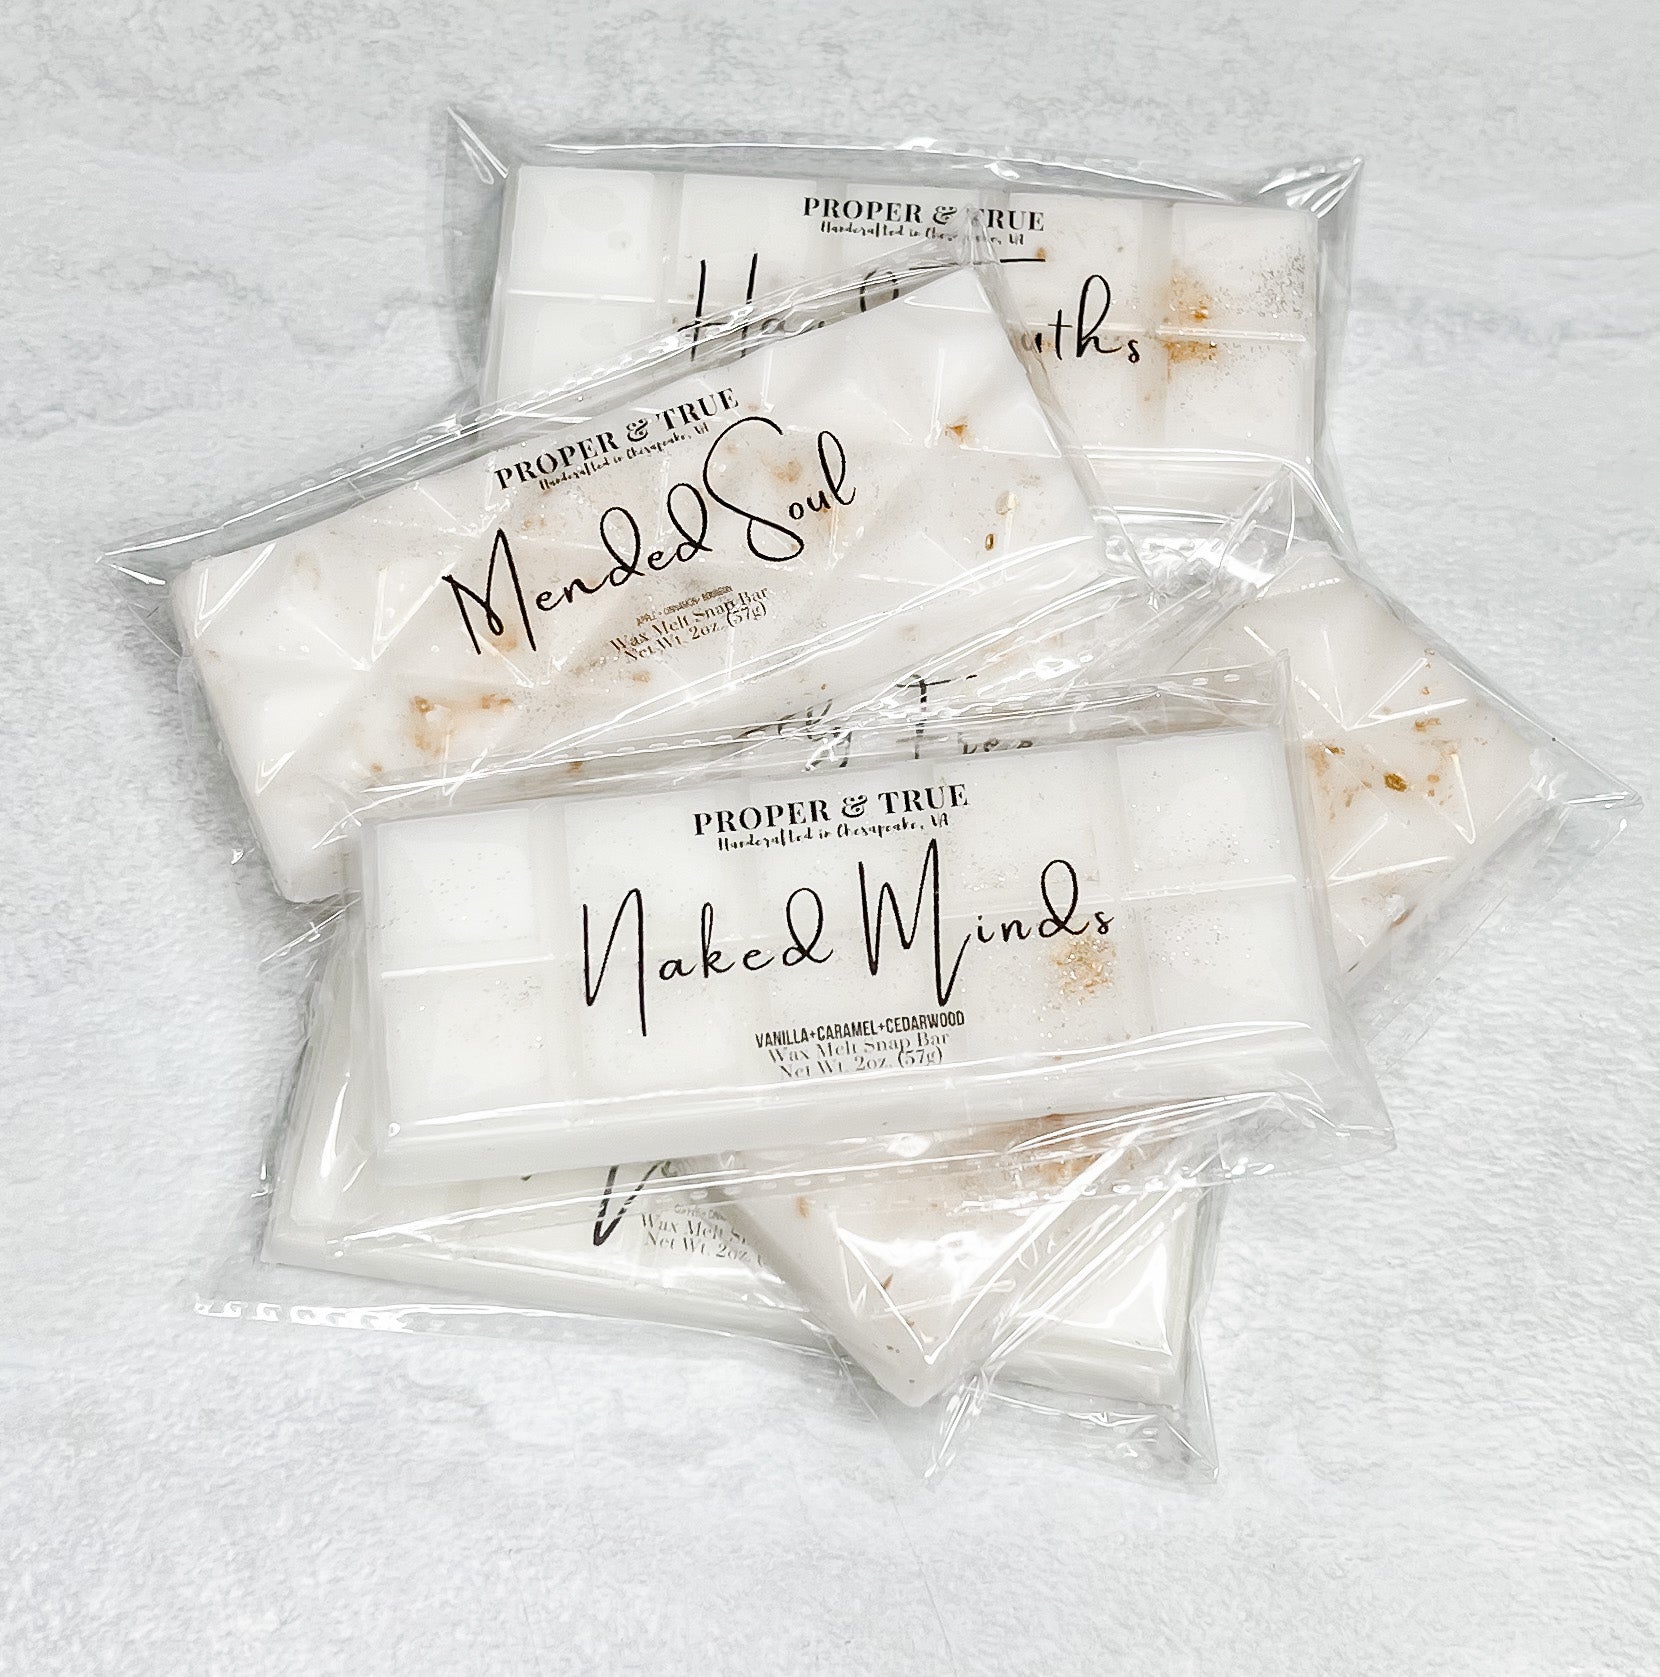 Fresh Brewed Coffee Scented Handmade Wax Melt Snap Bars Strong Scented 2.6  oz. Soy Wax Melts Robust Fragrance